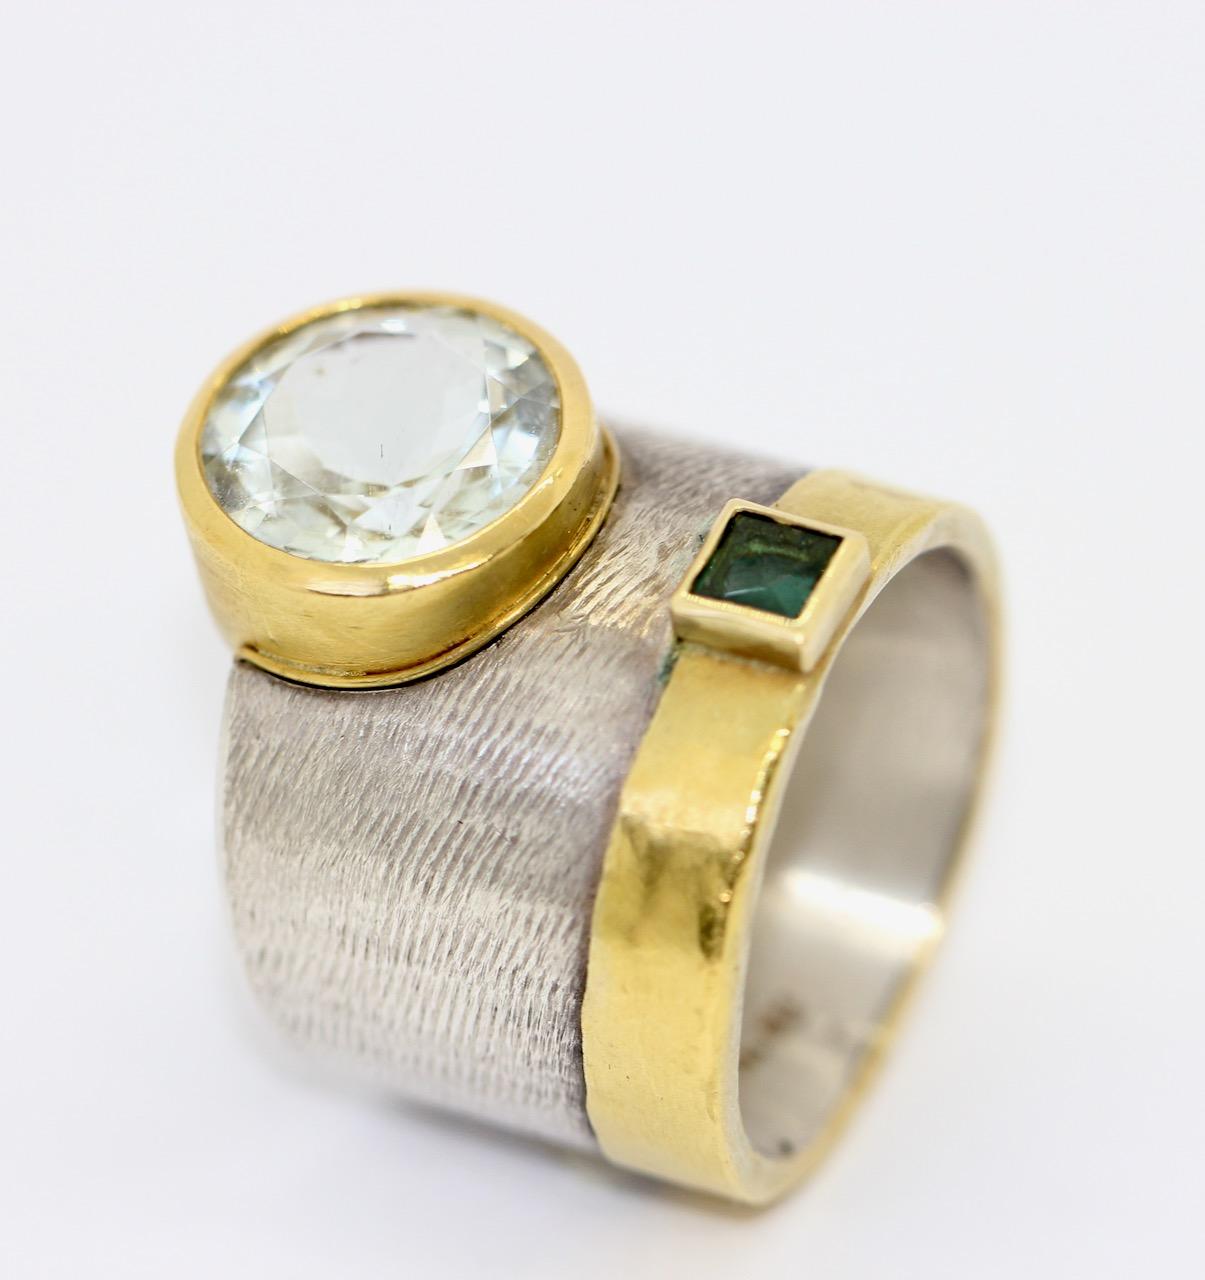 Fancy, solid and heavy designer ring made of sterling silver and 21.6 Karat gold with aquamarine and tourmaline.

Hallmarked. One of a kind by a master goldsmith.

Includes certificate of authenticity.